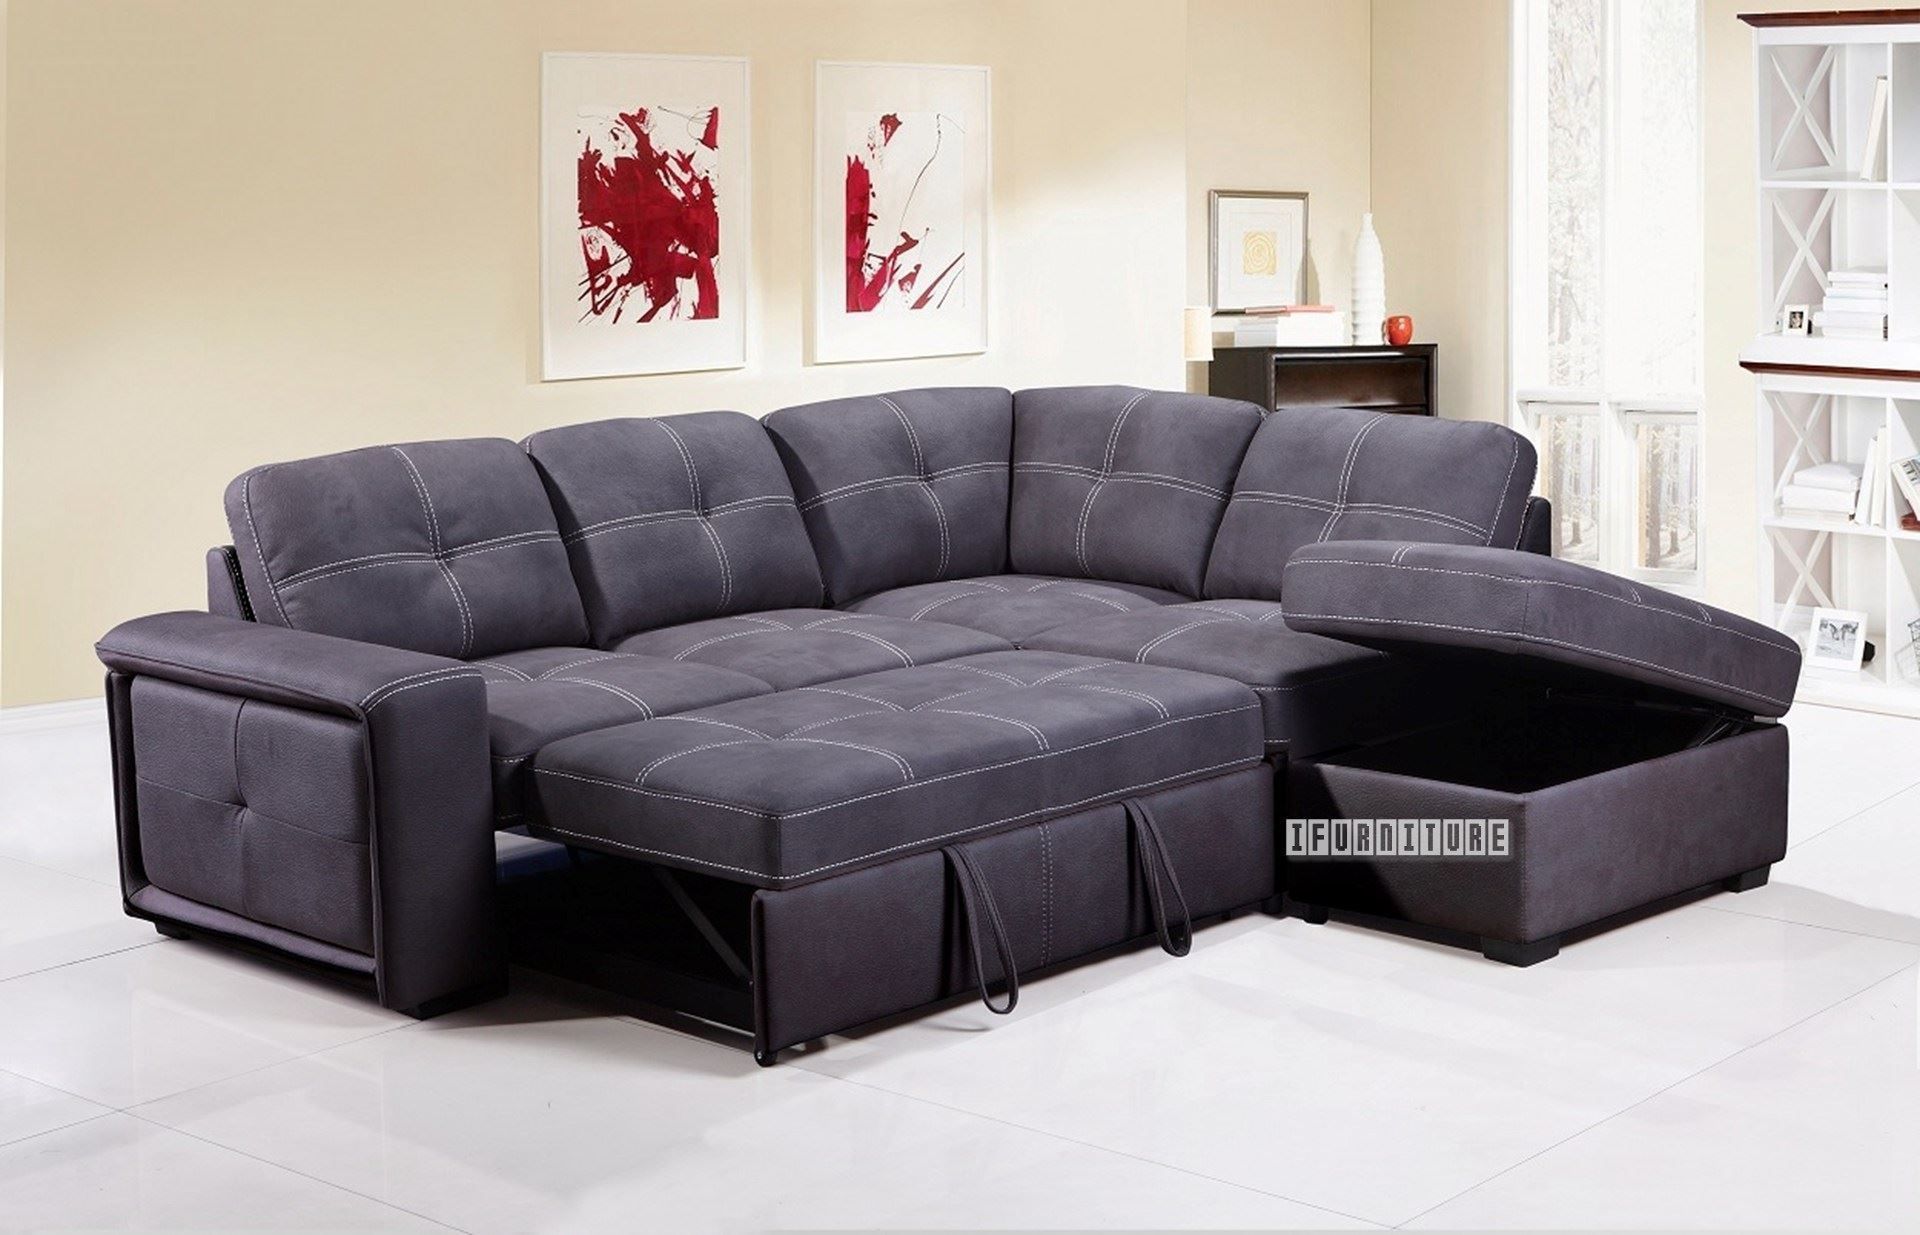 2023 Best Of Celine Sectional Futon Sofas With Storage Reclining Couch